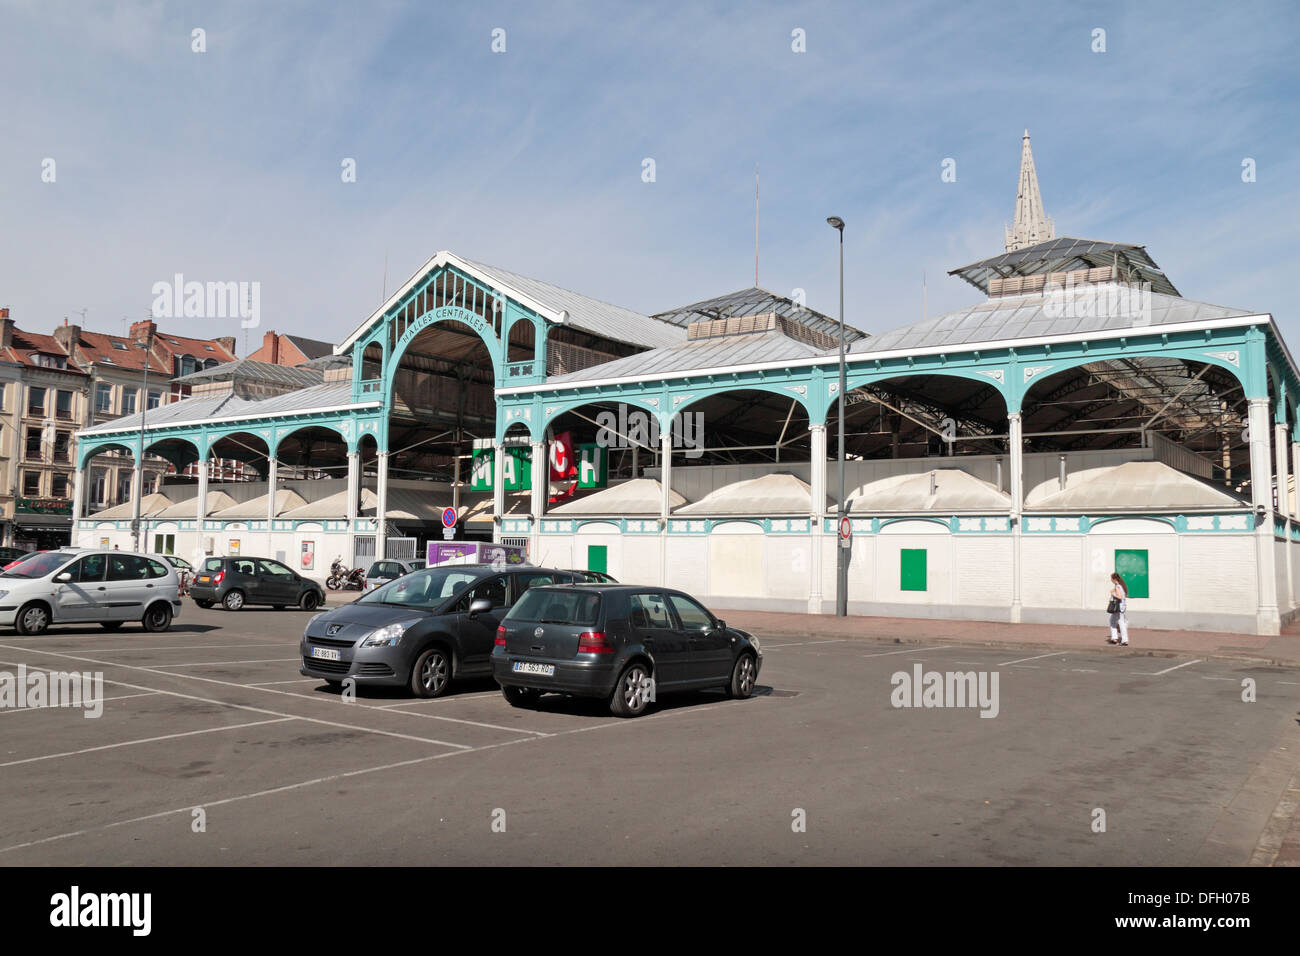 The Match Supermarket on rue Solférino housed in an old covered market, Lille, Nord-Pas-de-Calais, Nord, France. Stock Photo